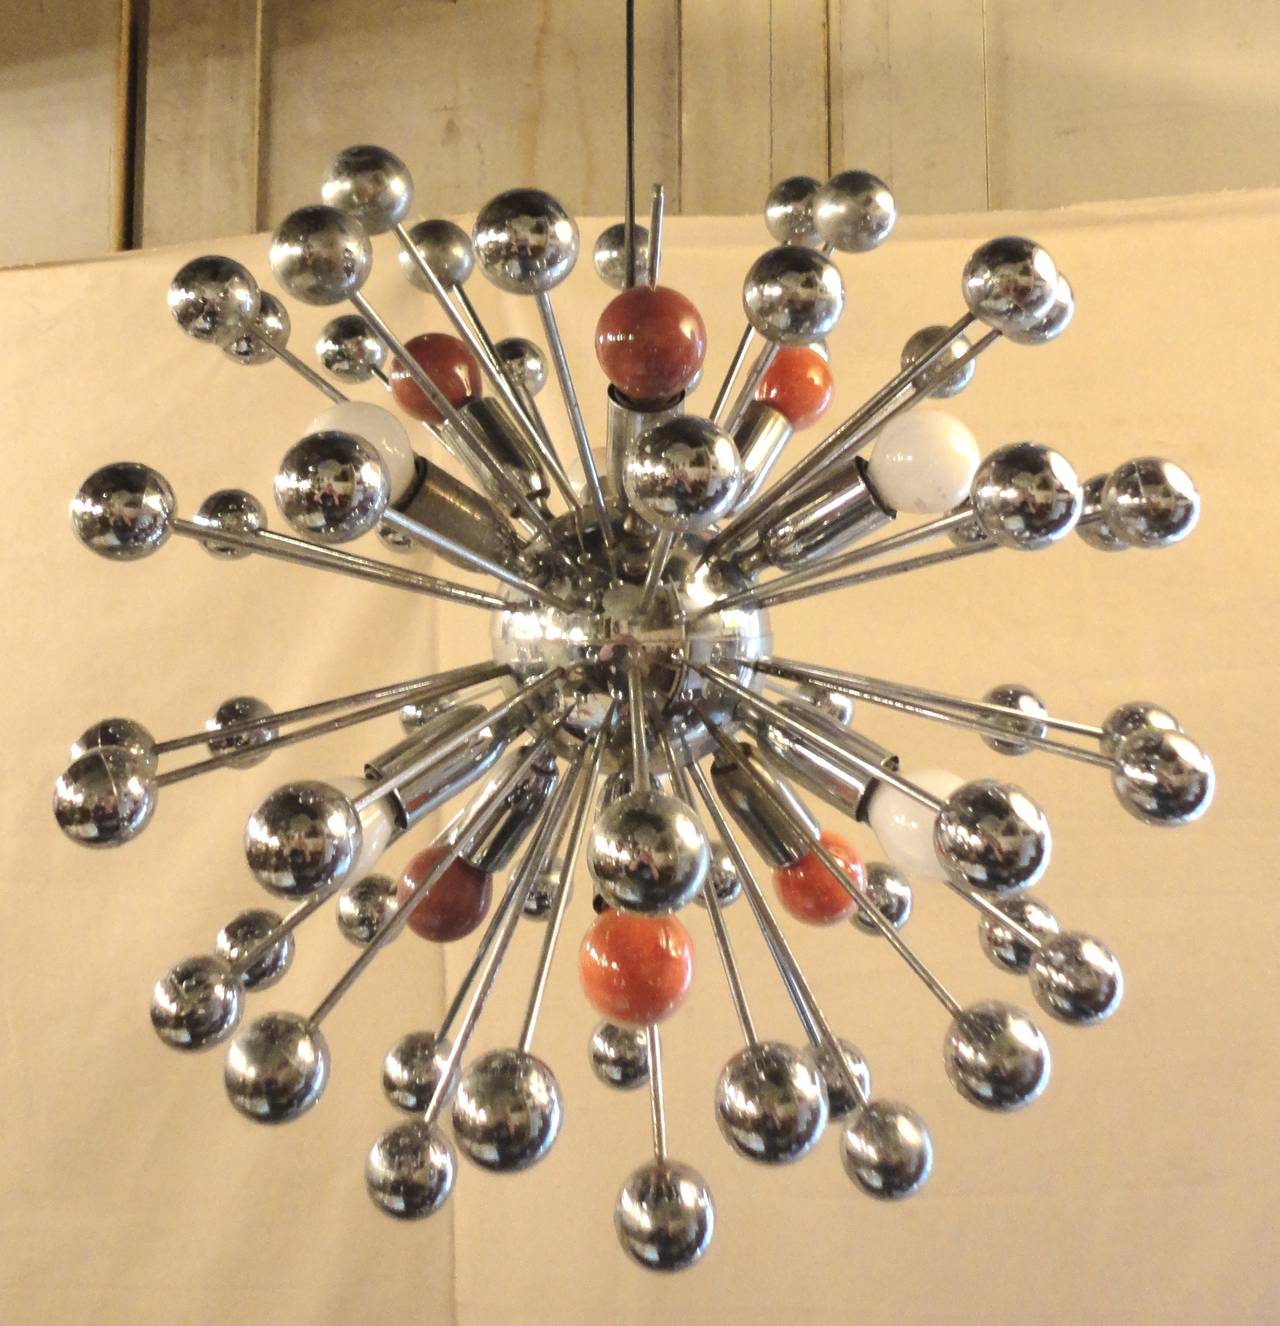 Vintage modern atomic style pendant light. Made of chrome rods with polished globes, giving an 